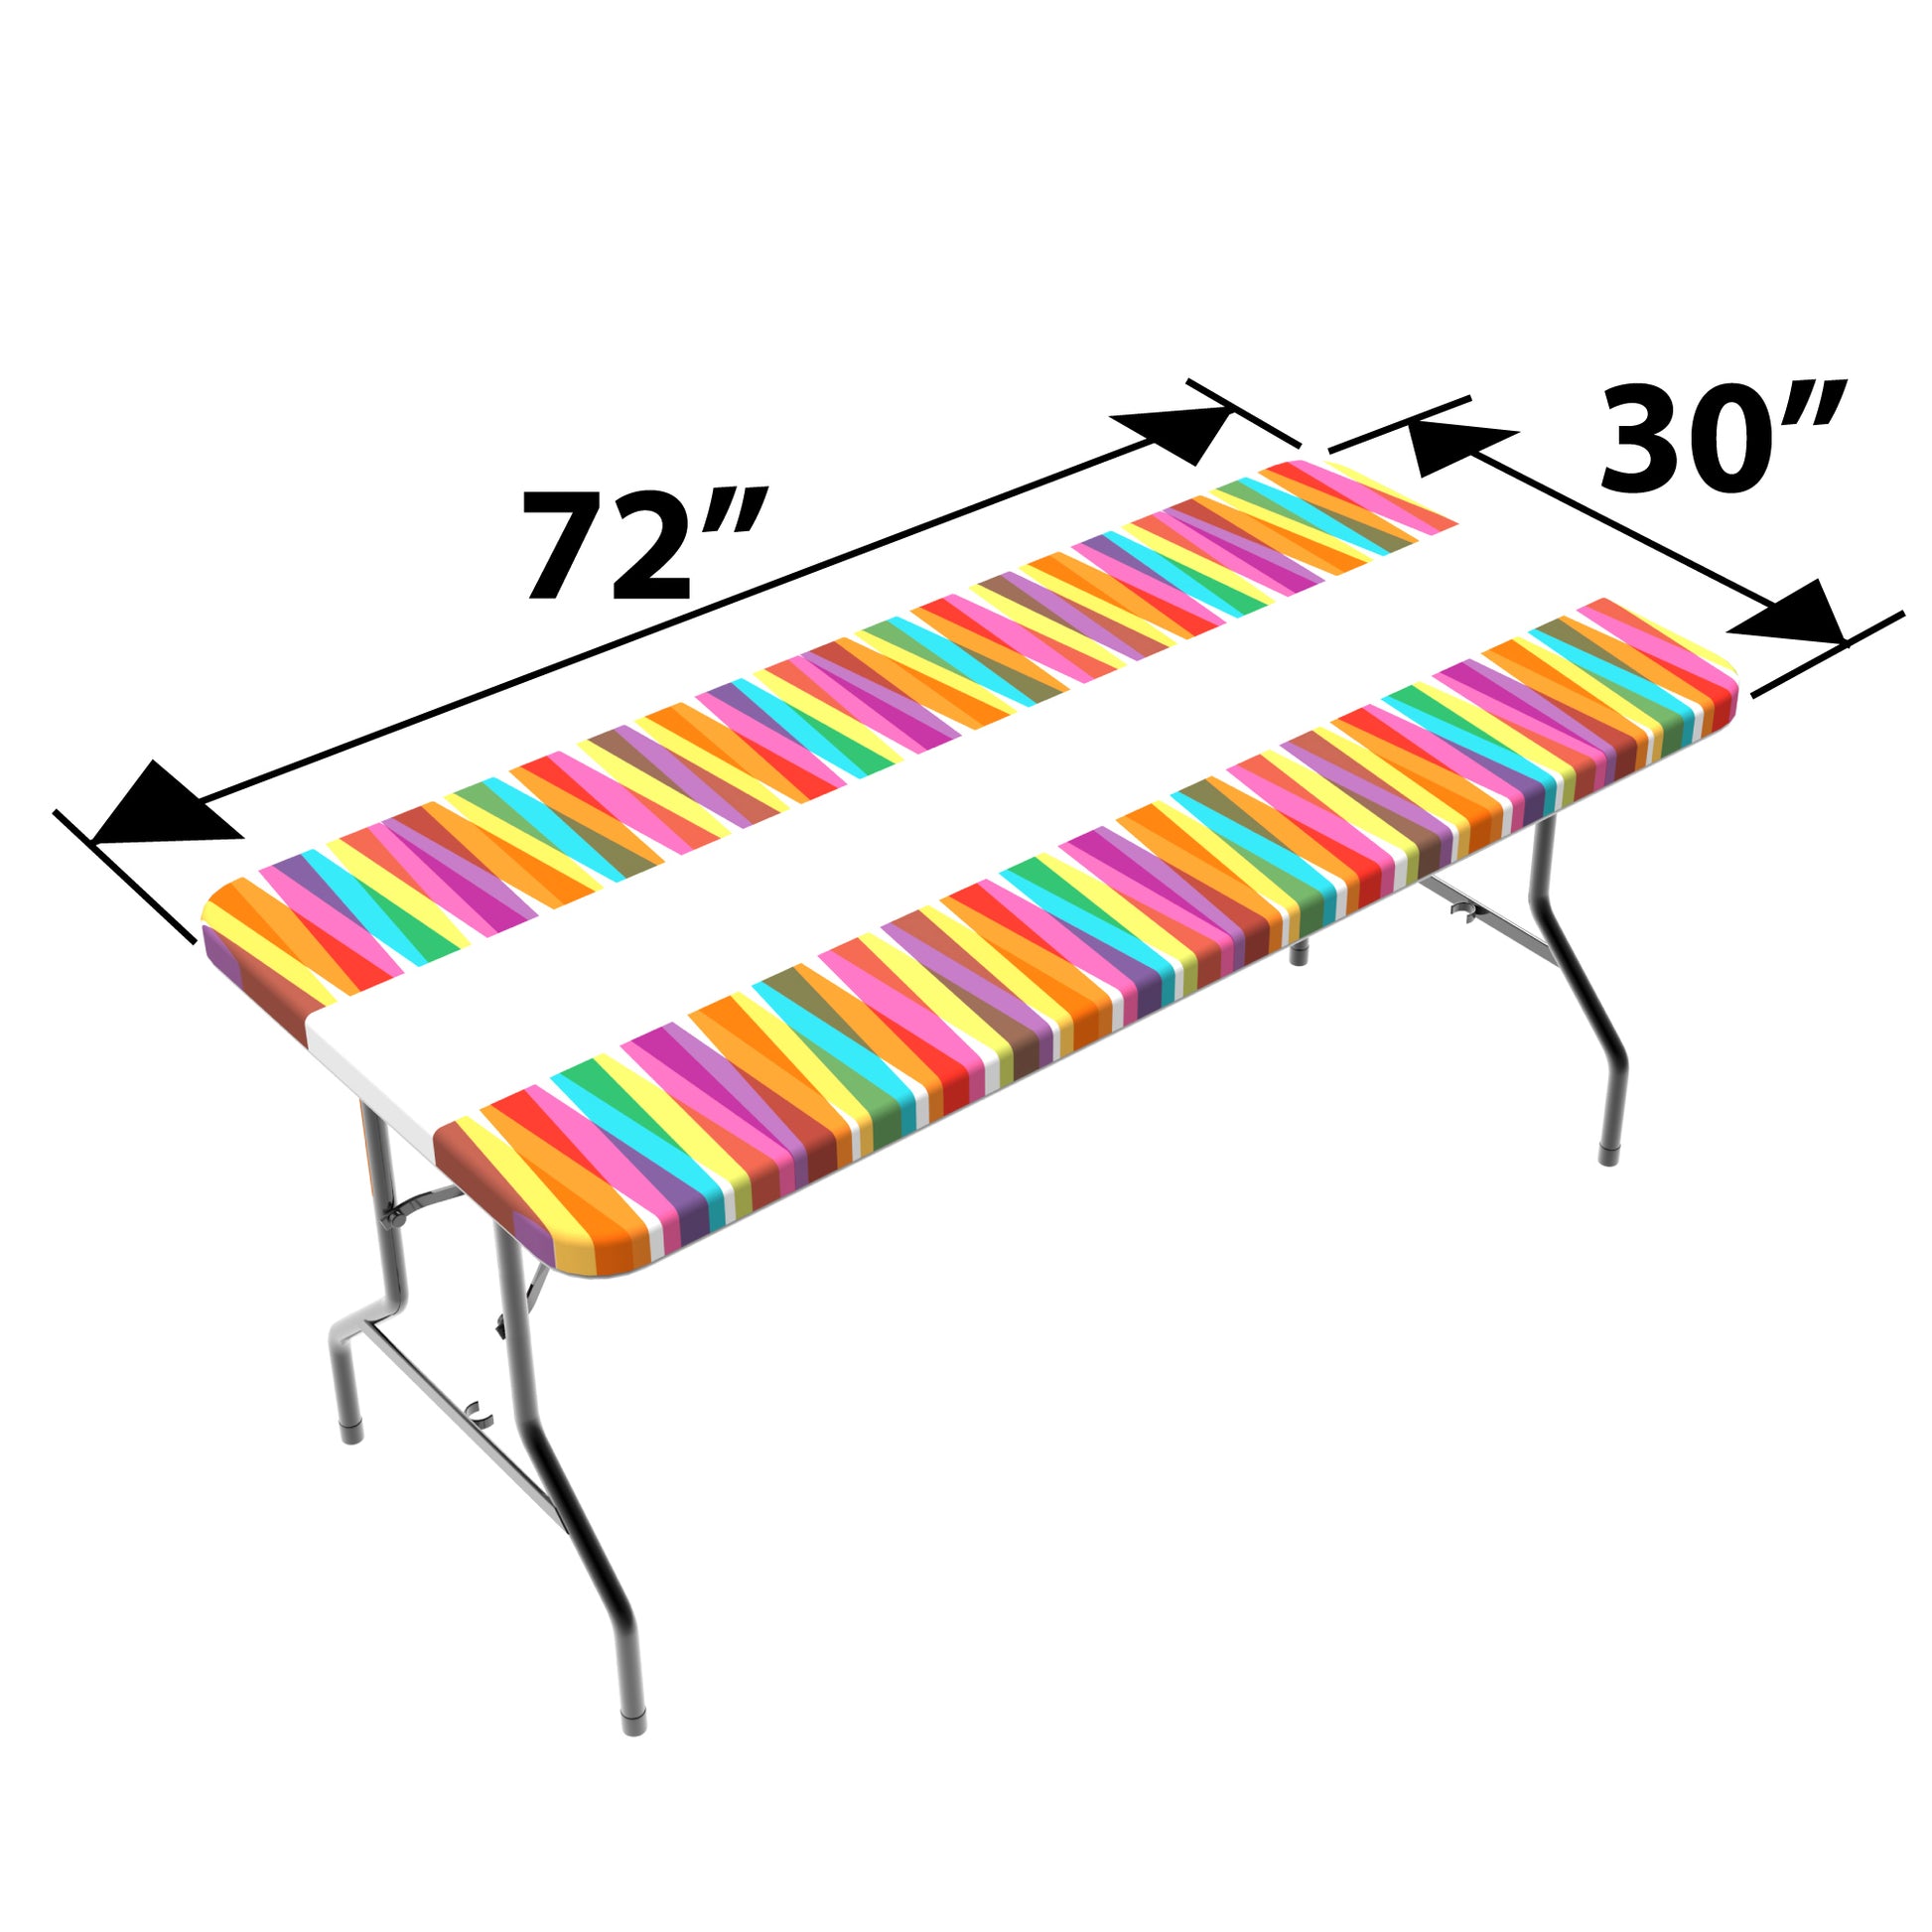 TableCloth PLUS 72" Laces Fitted Polyester Tablecloth for 6' Folding Tables dimensions